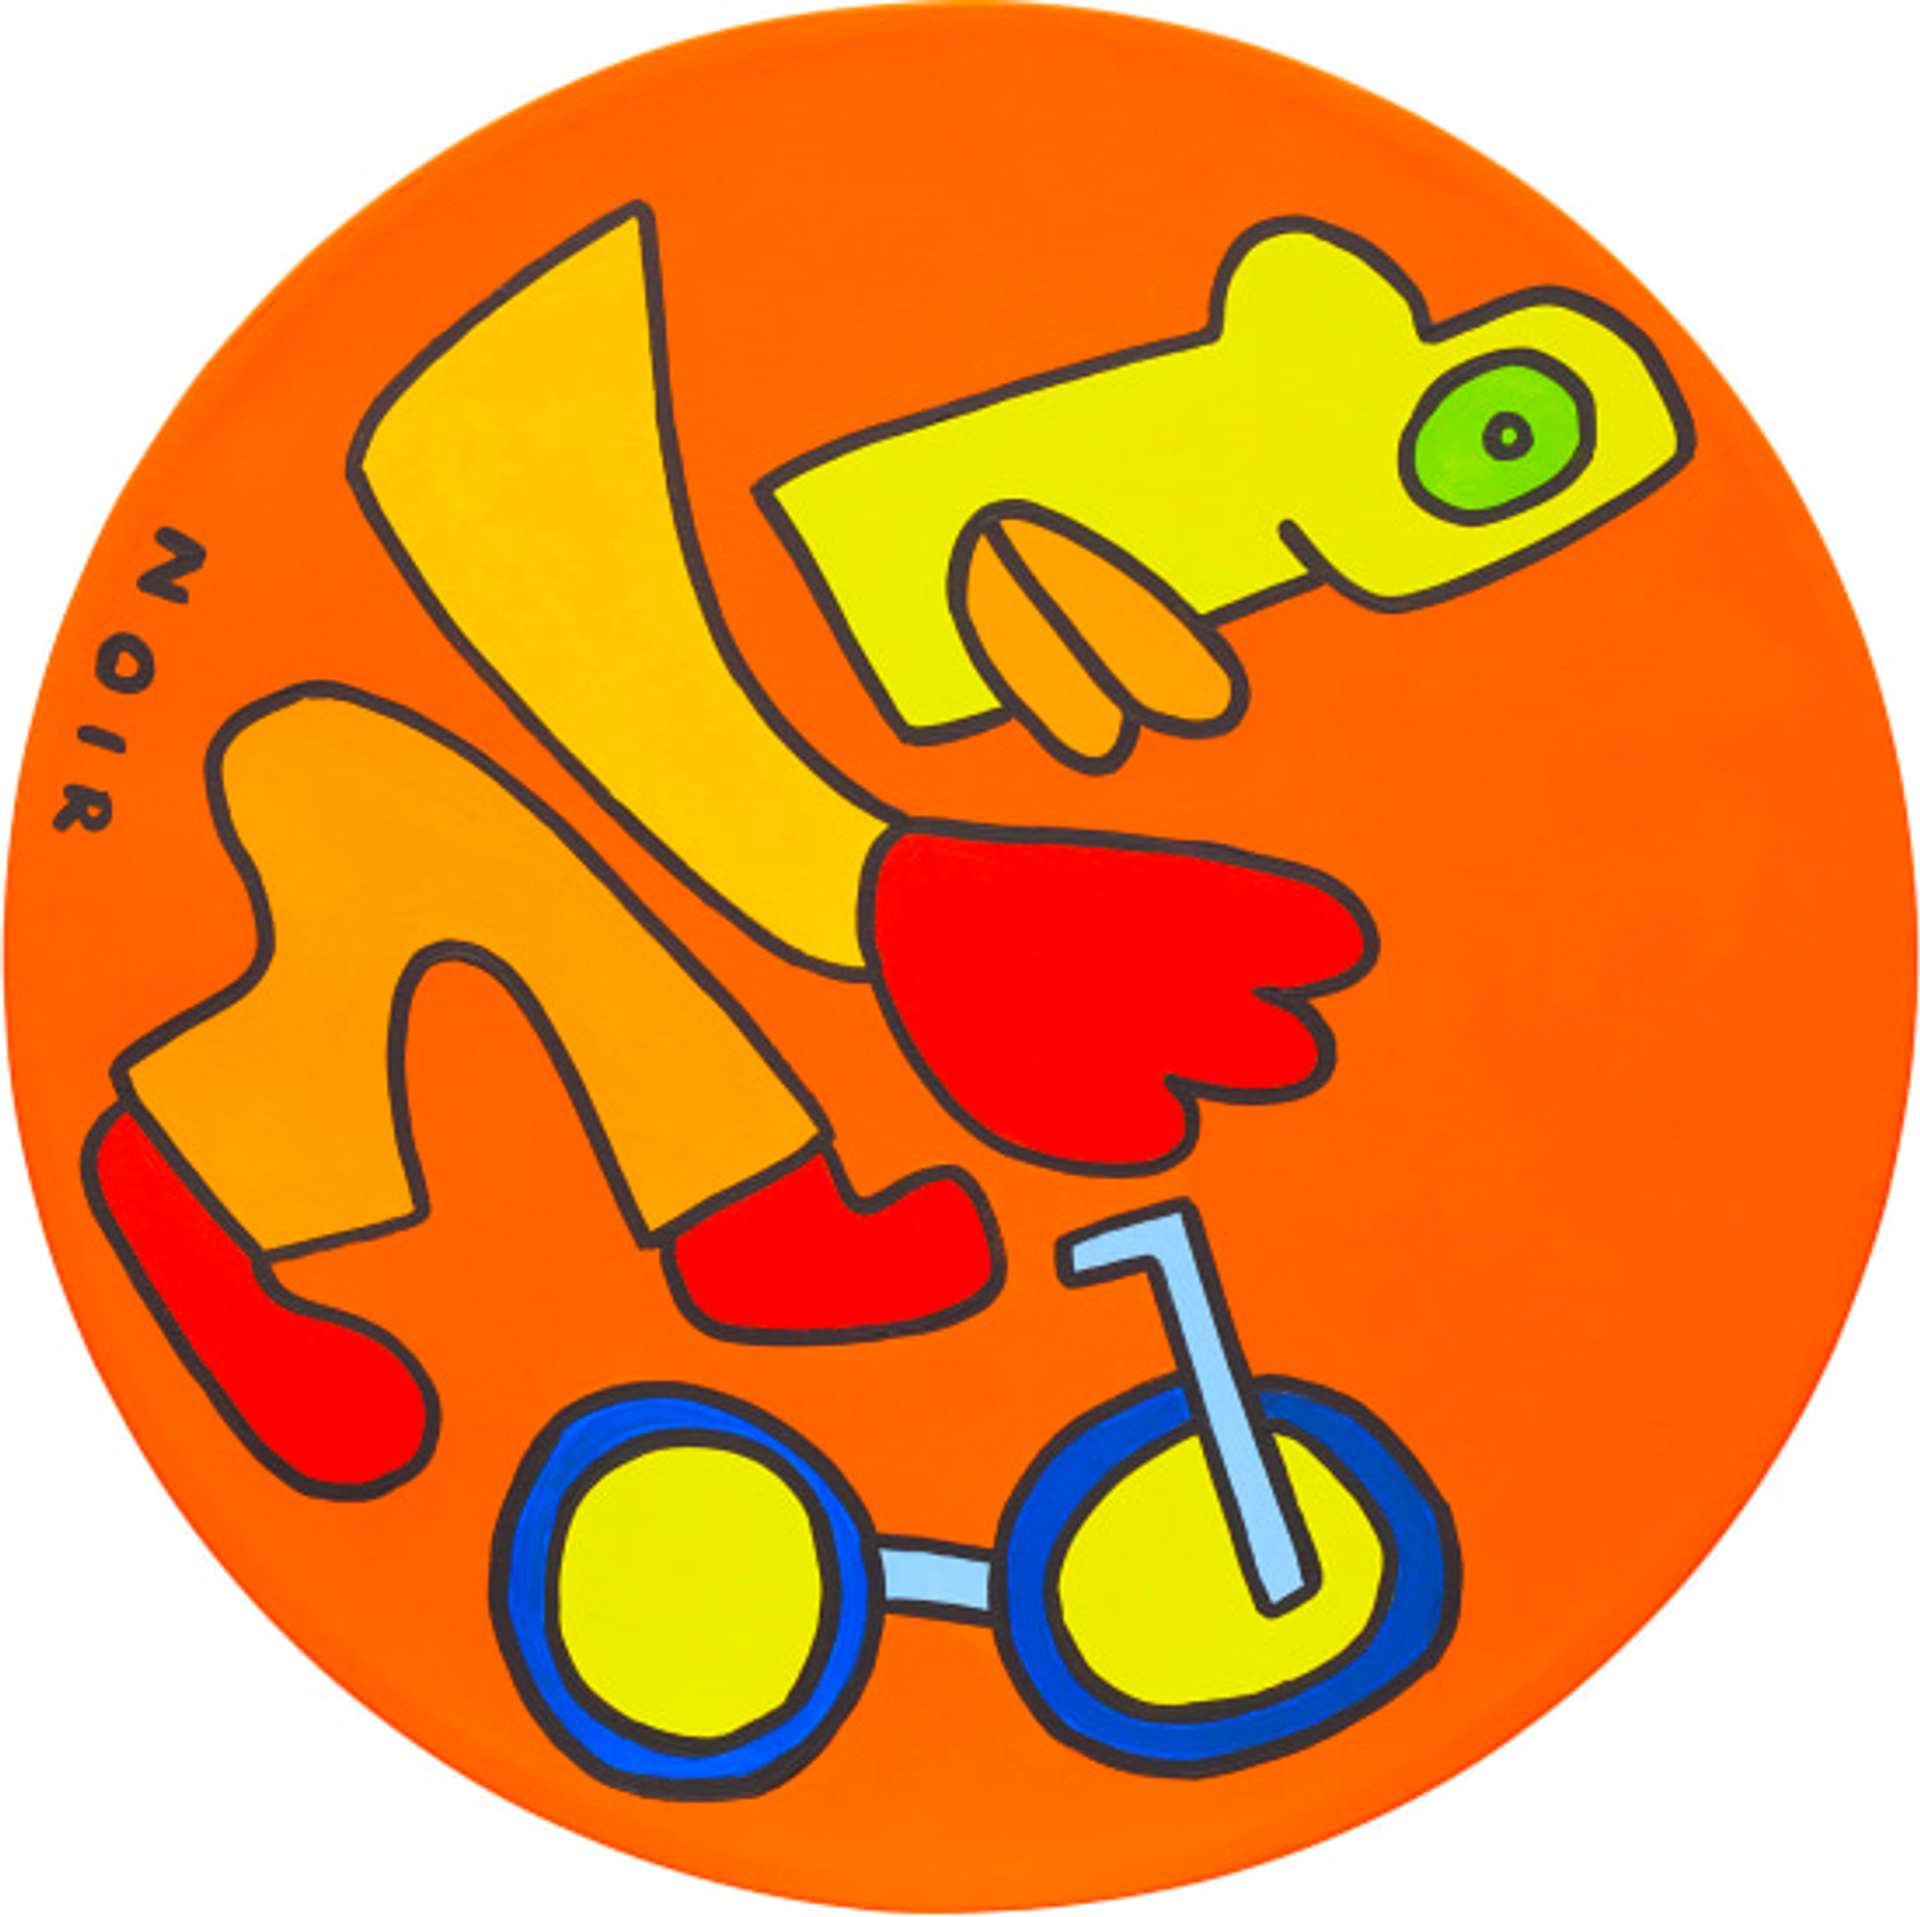 A vibrant orange circular canvas displaying a geometrically disassembled caricature figure in a side profile view. The figure is positioned above a two-dimensional bicycle with yellow wheels, blue tires, and light blue handlebars.